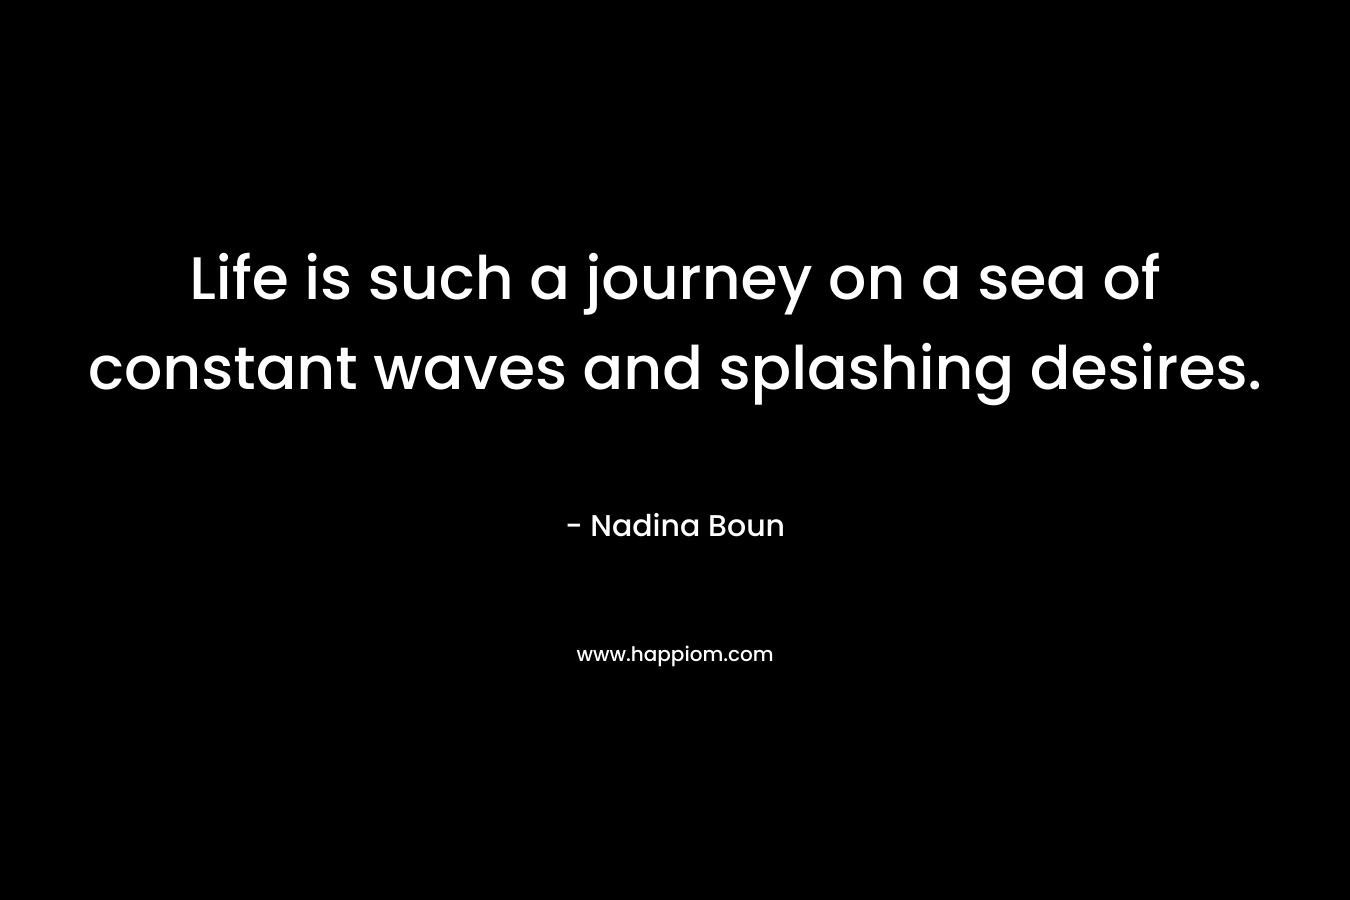 Life is such a journey on a sea of constant waves and splashing desires.